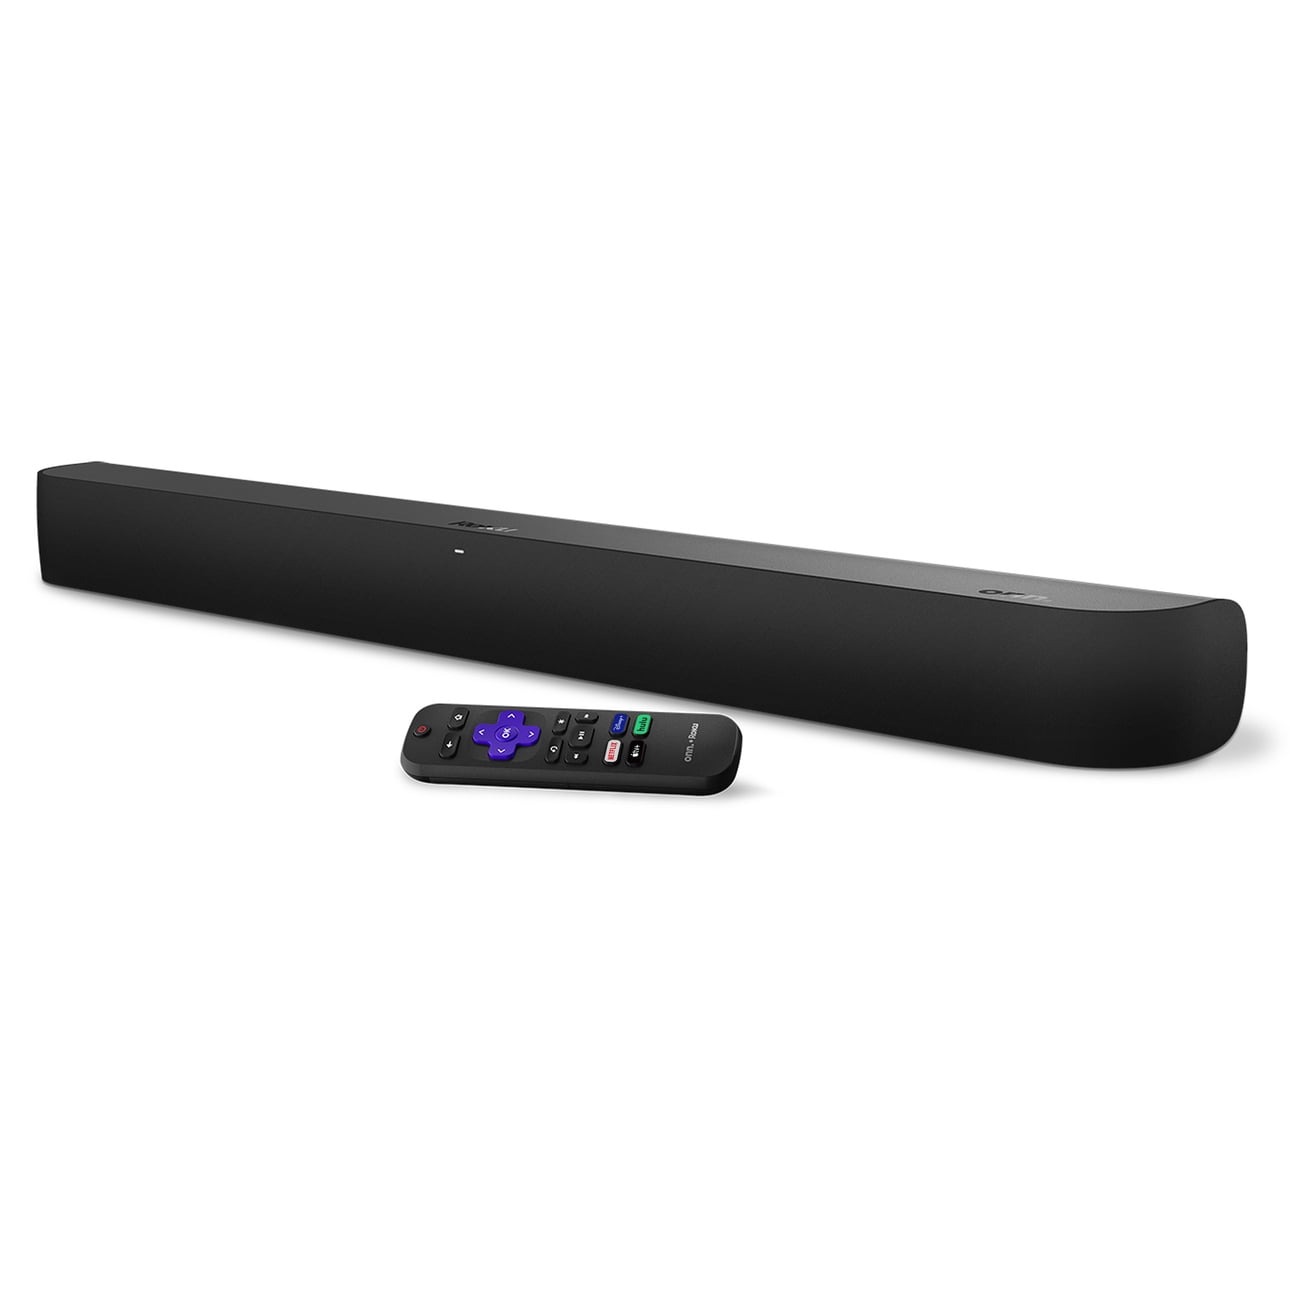 Can connect Bluetooth devices to the soundbar